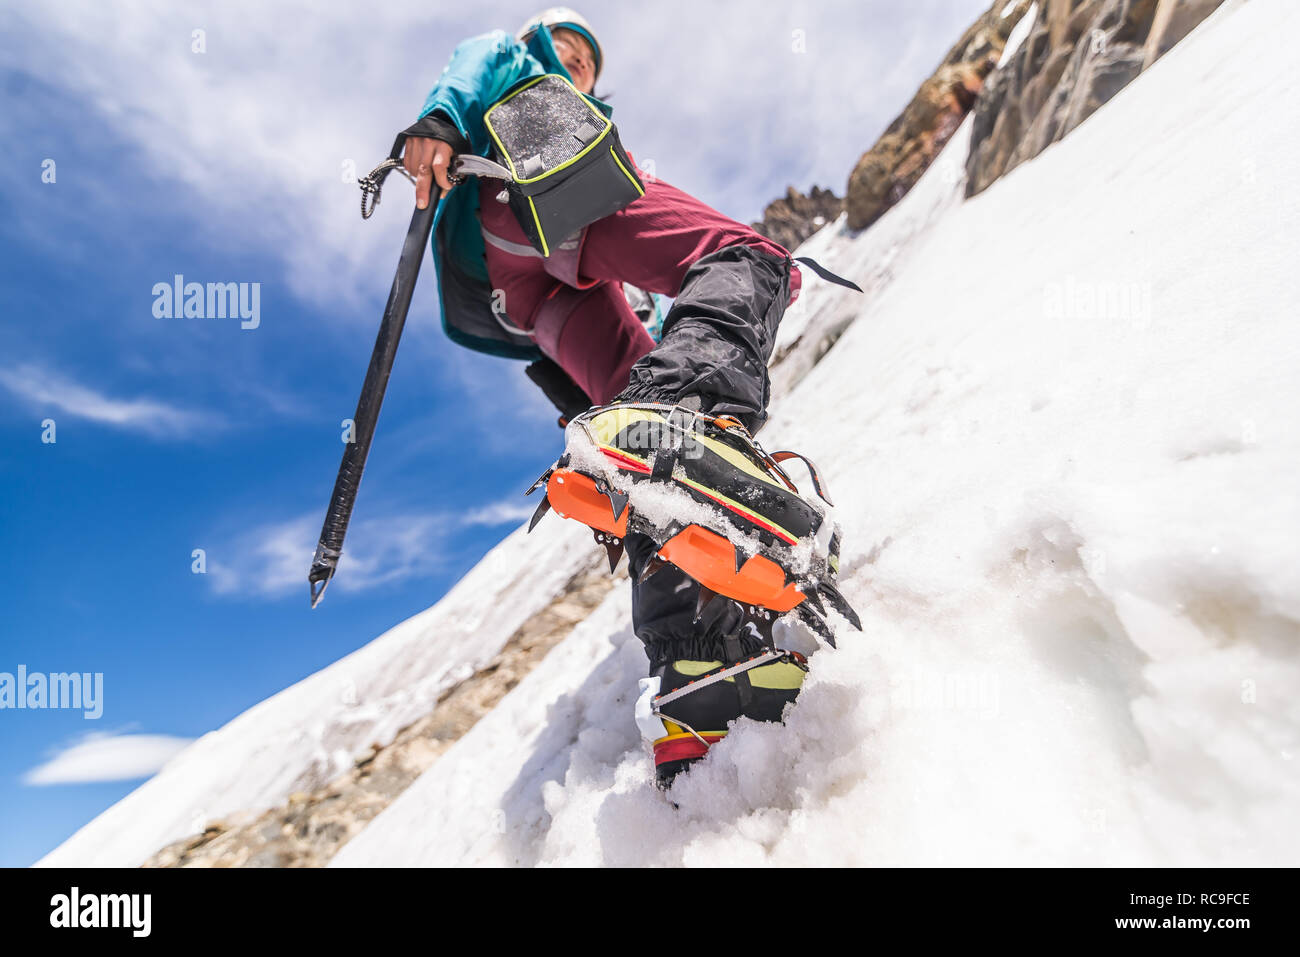 Rock climber in snowy slope, El Chaltén, south Patagonia, Argentina Stock Photo